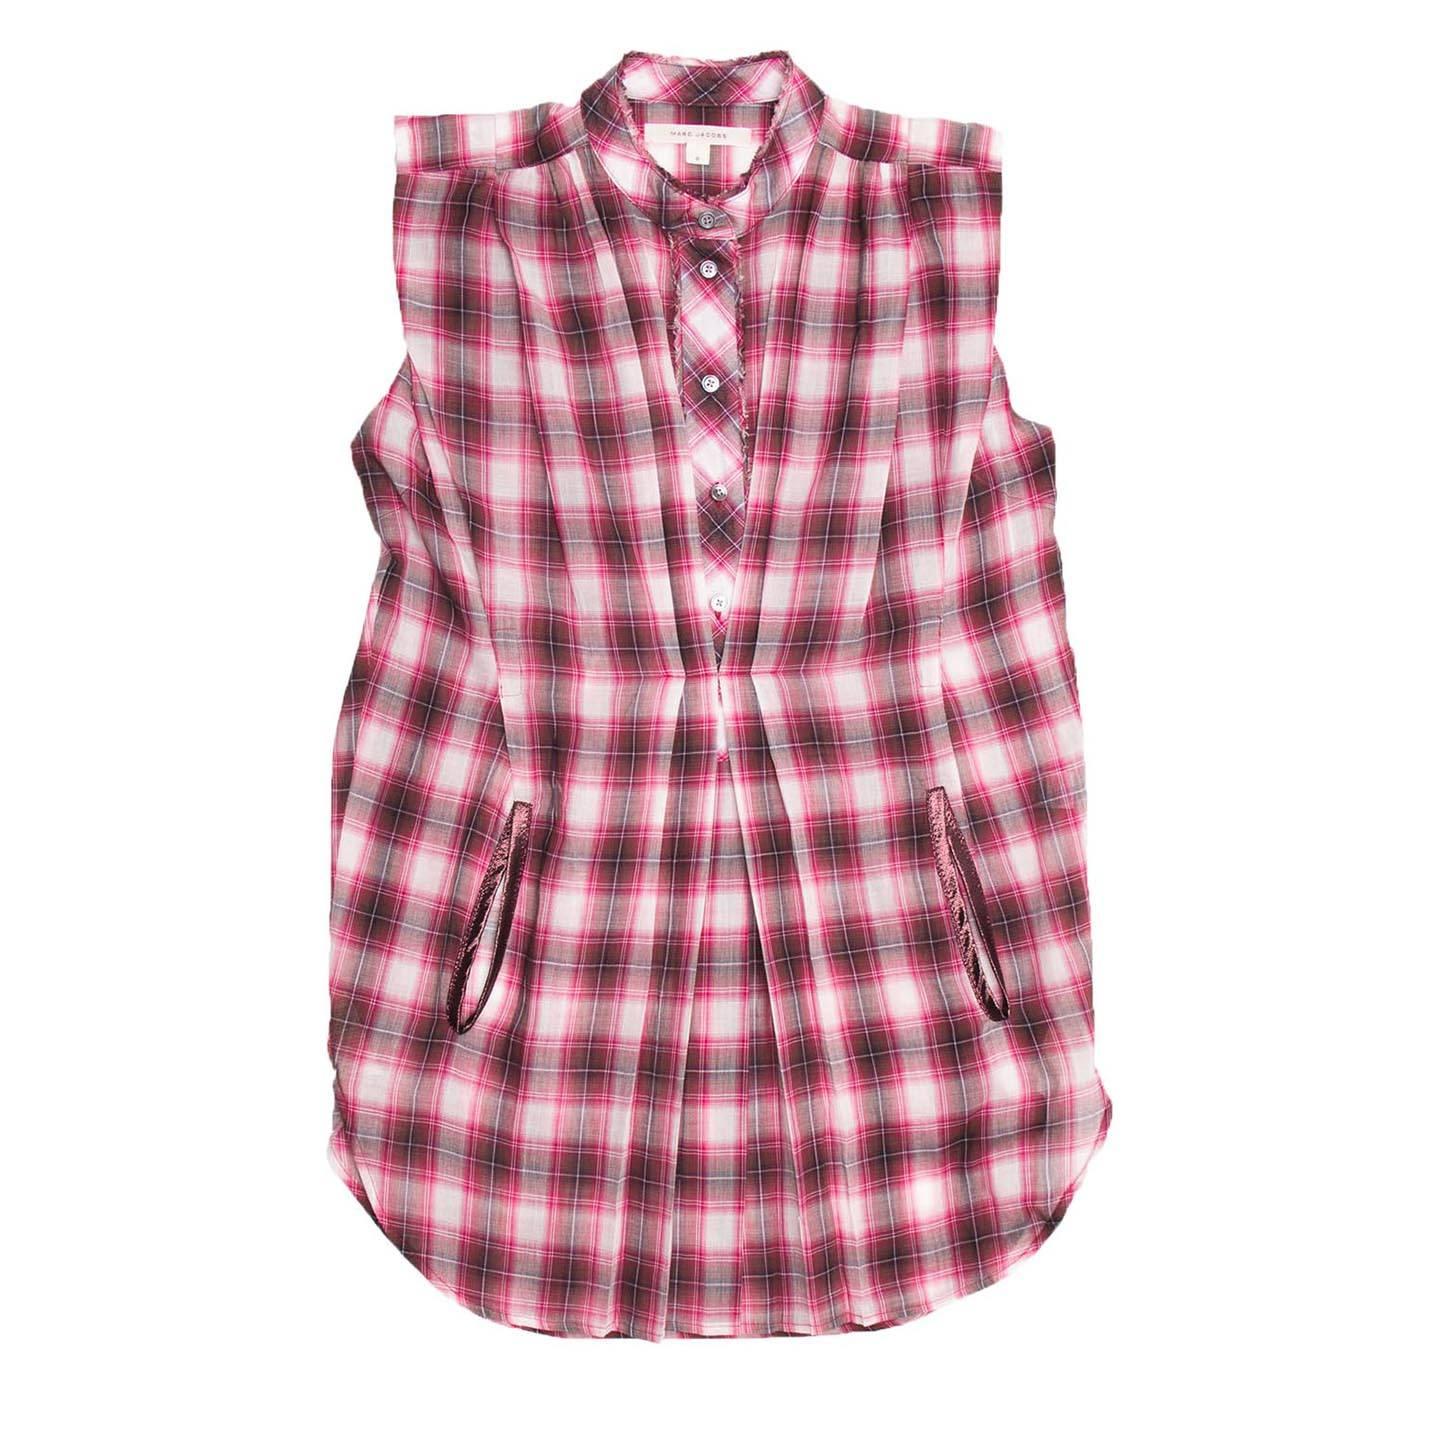 Red, black, grey and white plaid cotton sleeveless long shirt with raw edge inserts on Nehru collar and button placket. Round shaped hem with detailed side vents and front pockets enriched with satin profiles. Light pleats at front and little